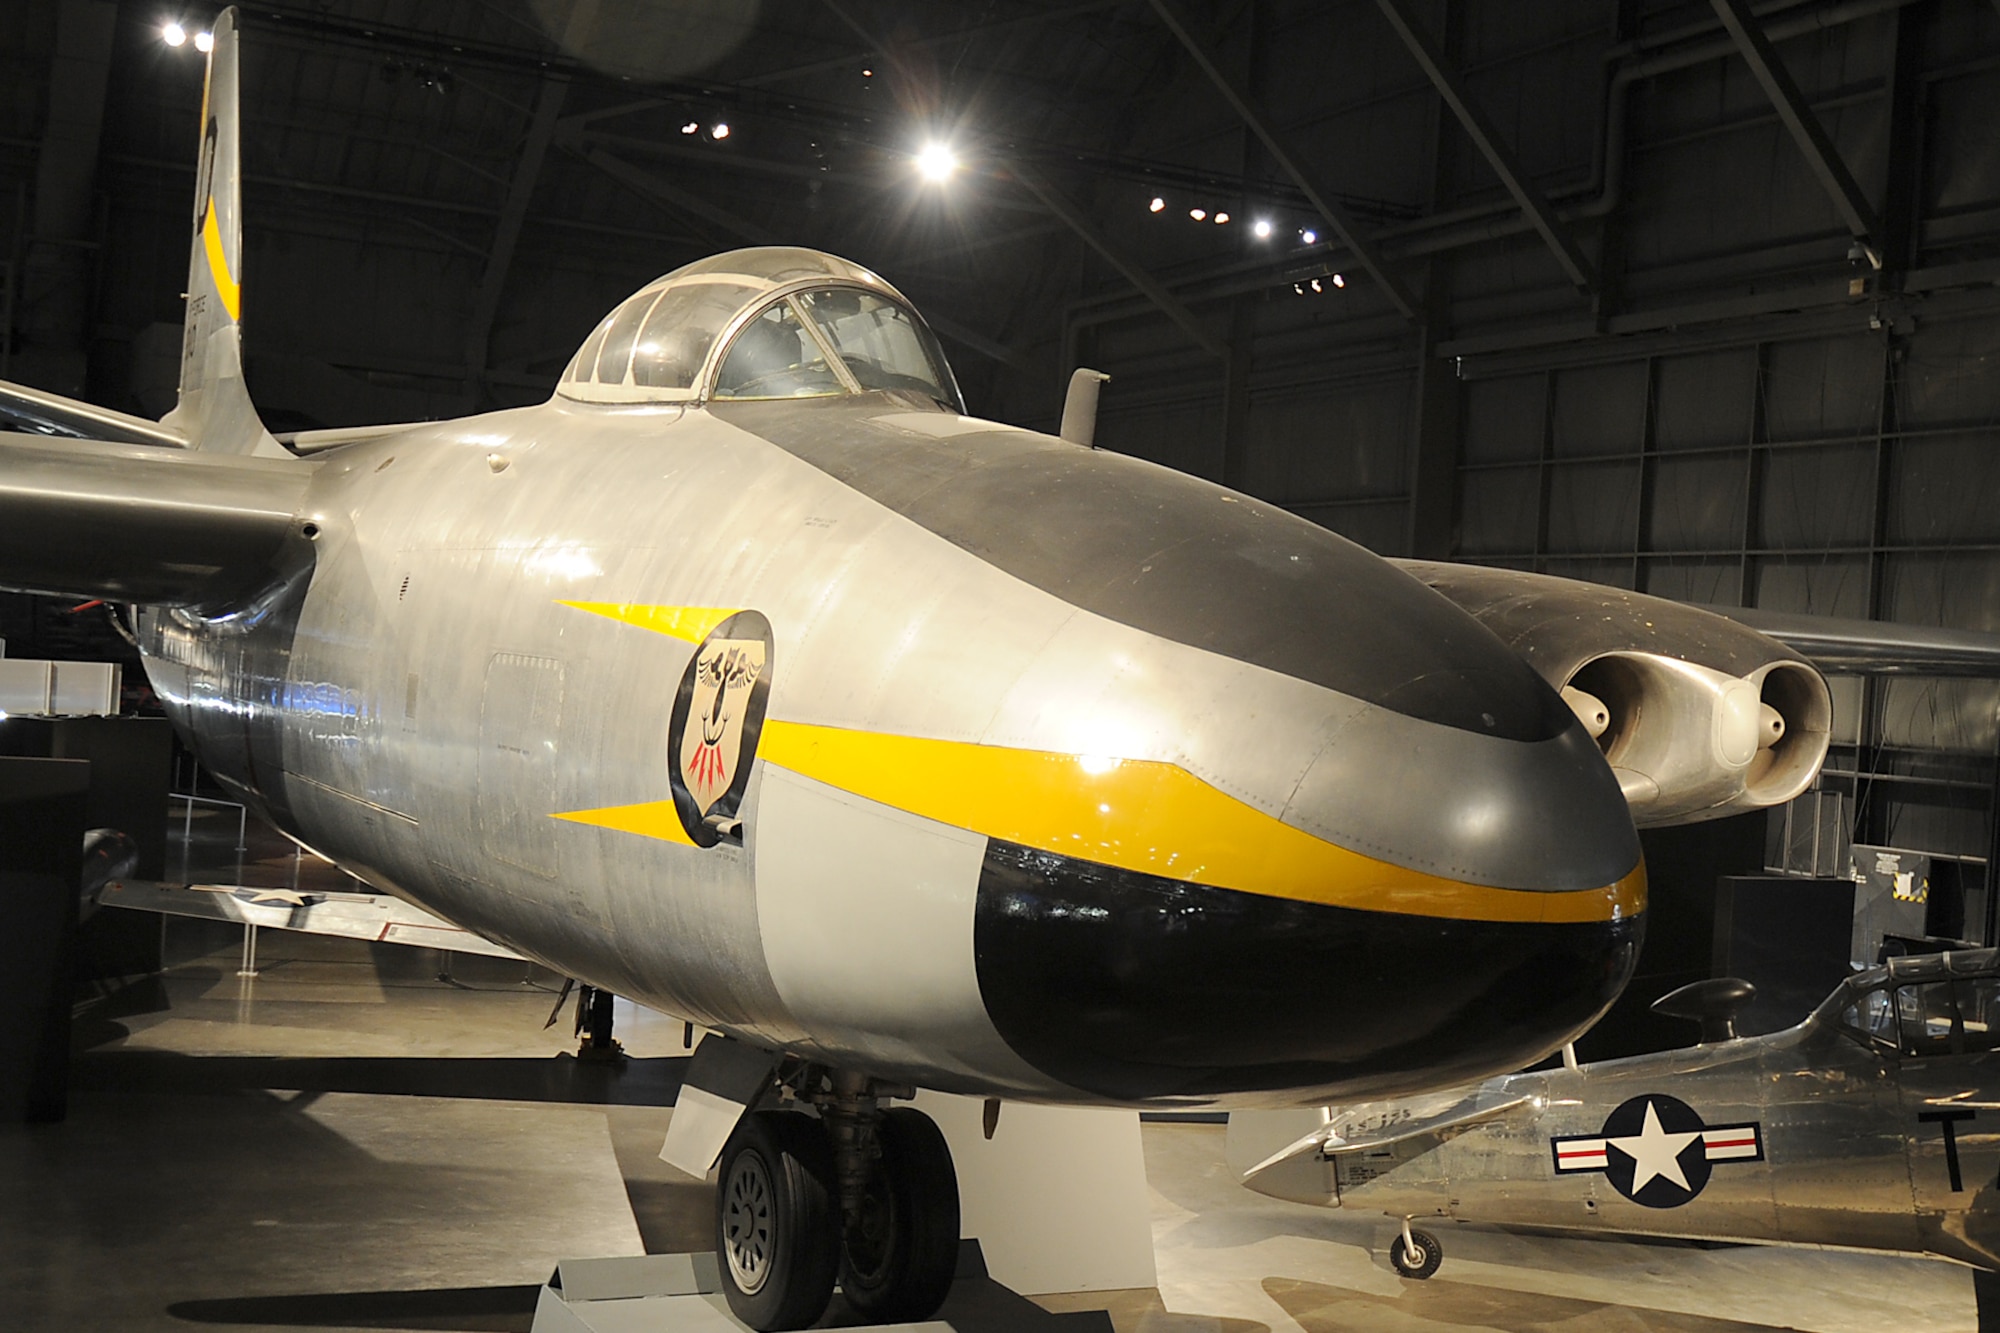 North American B-45C Tornado > National Museum of the United States Air  Force™ > Display